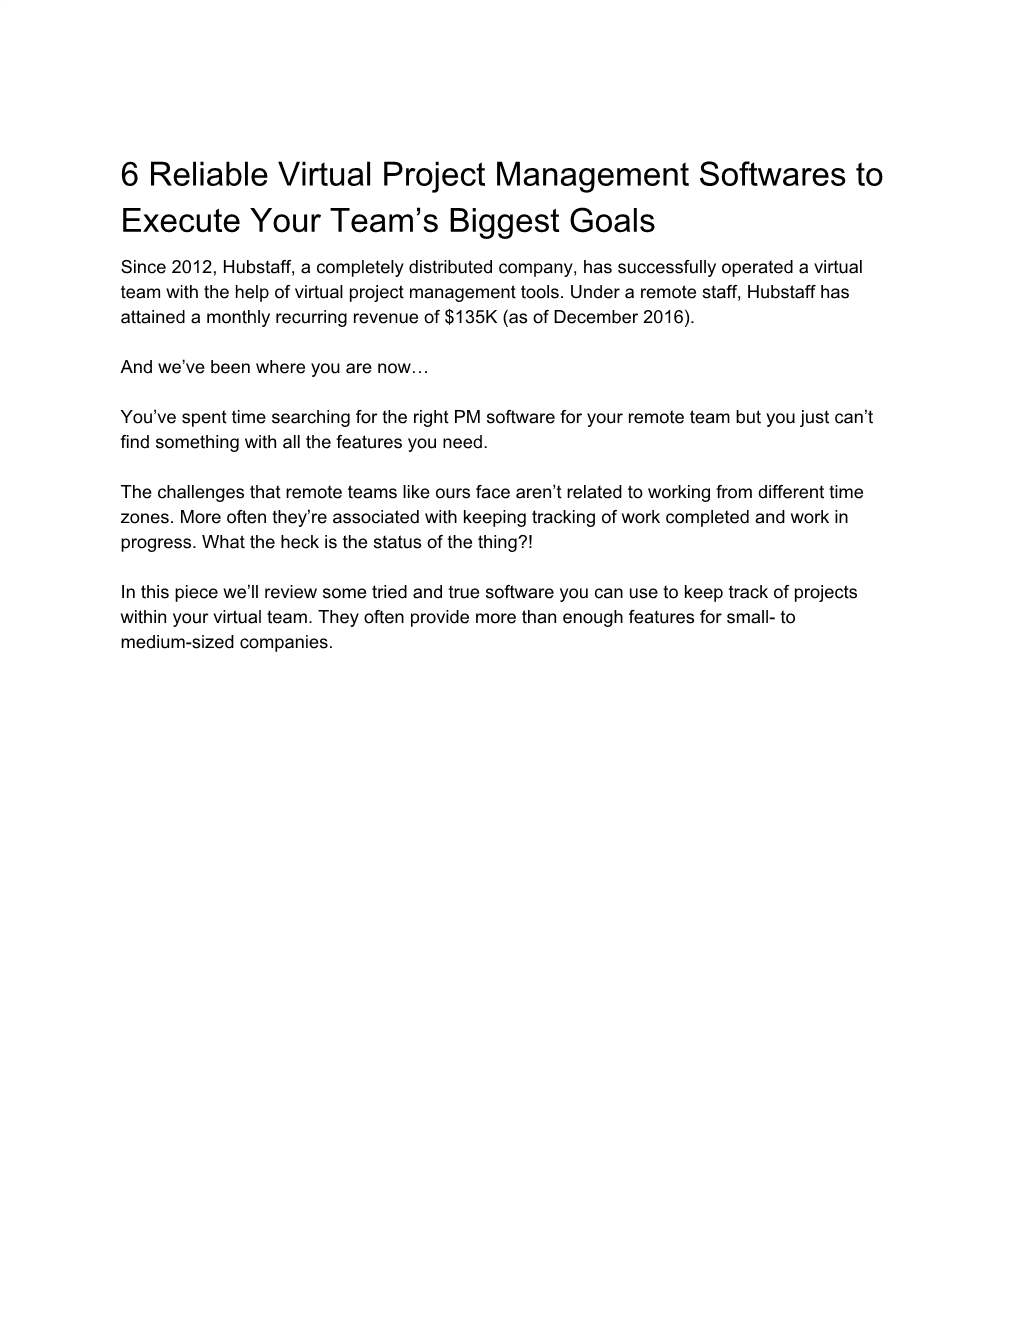 6 Reliable Virtual Project Management Softwares to Execute Your Team’S Biggest Goals